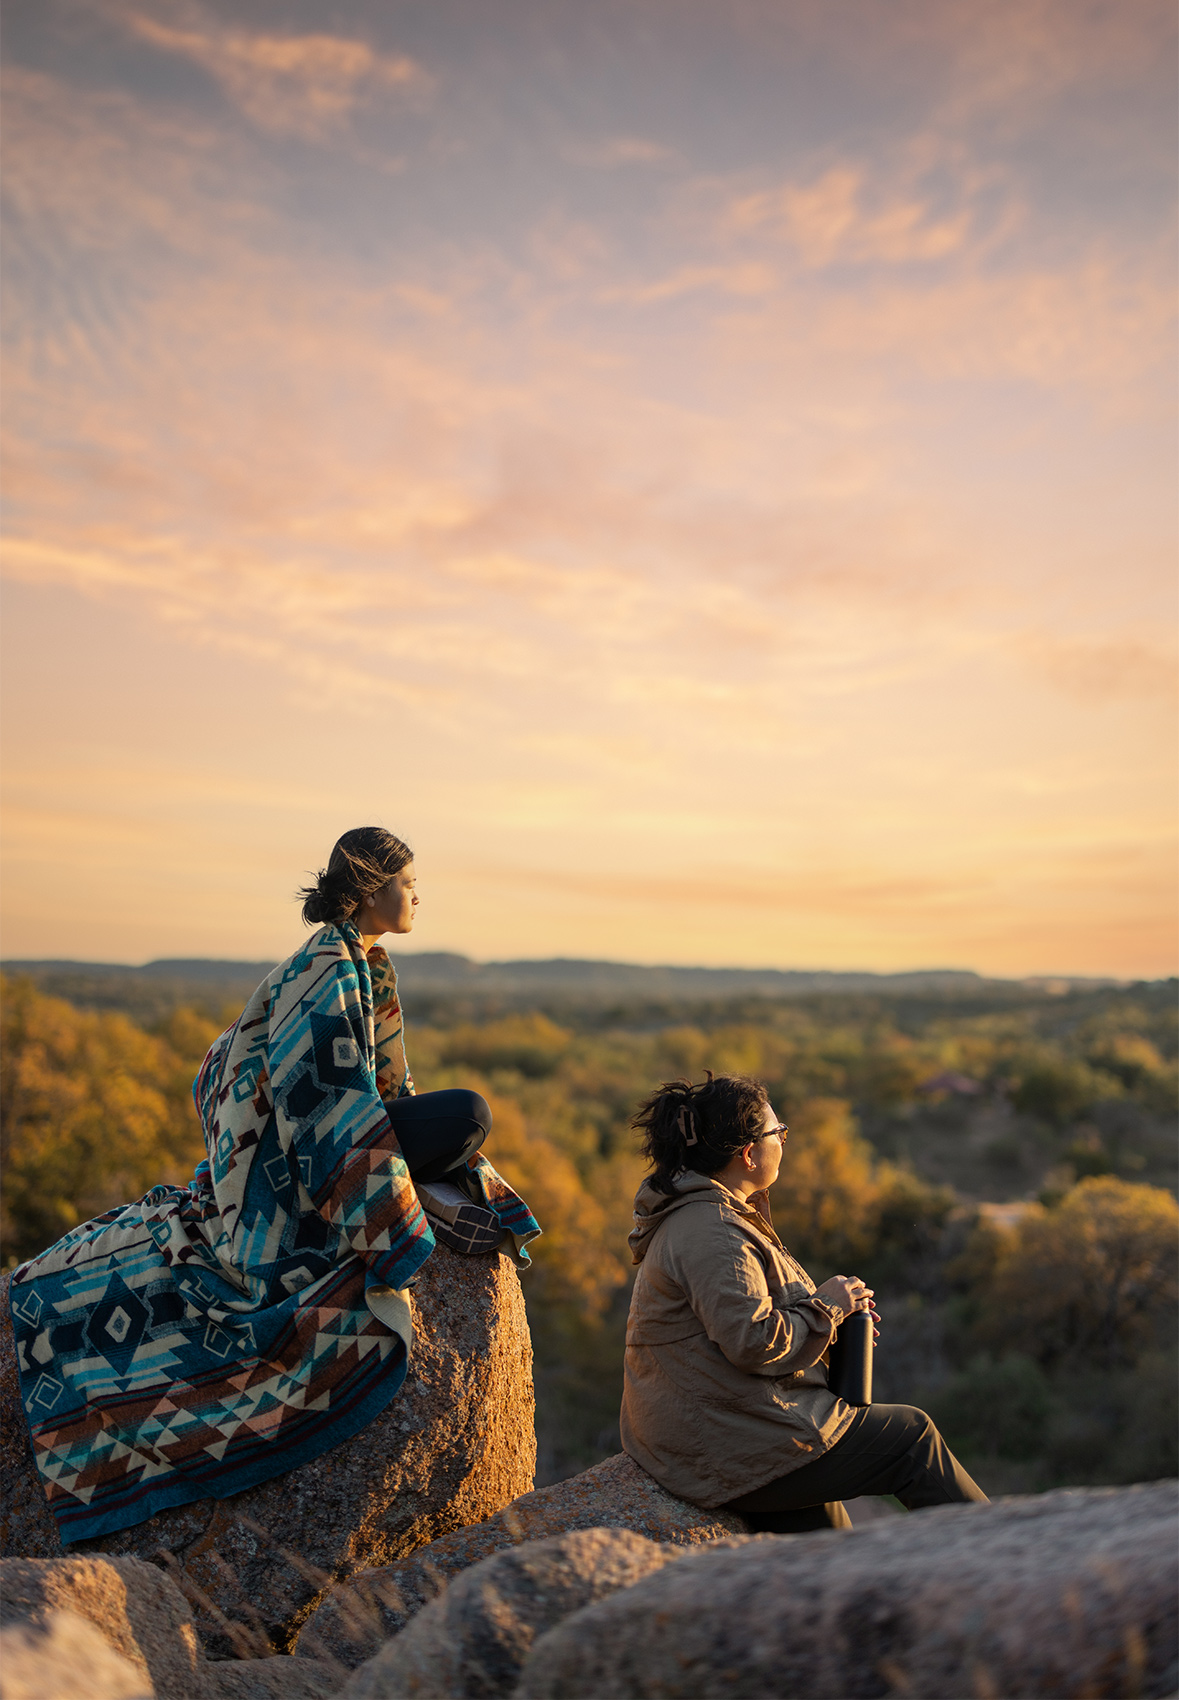 mother and daughter sit and view sunset at enchanted rock state park in texas